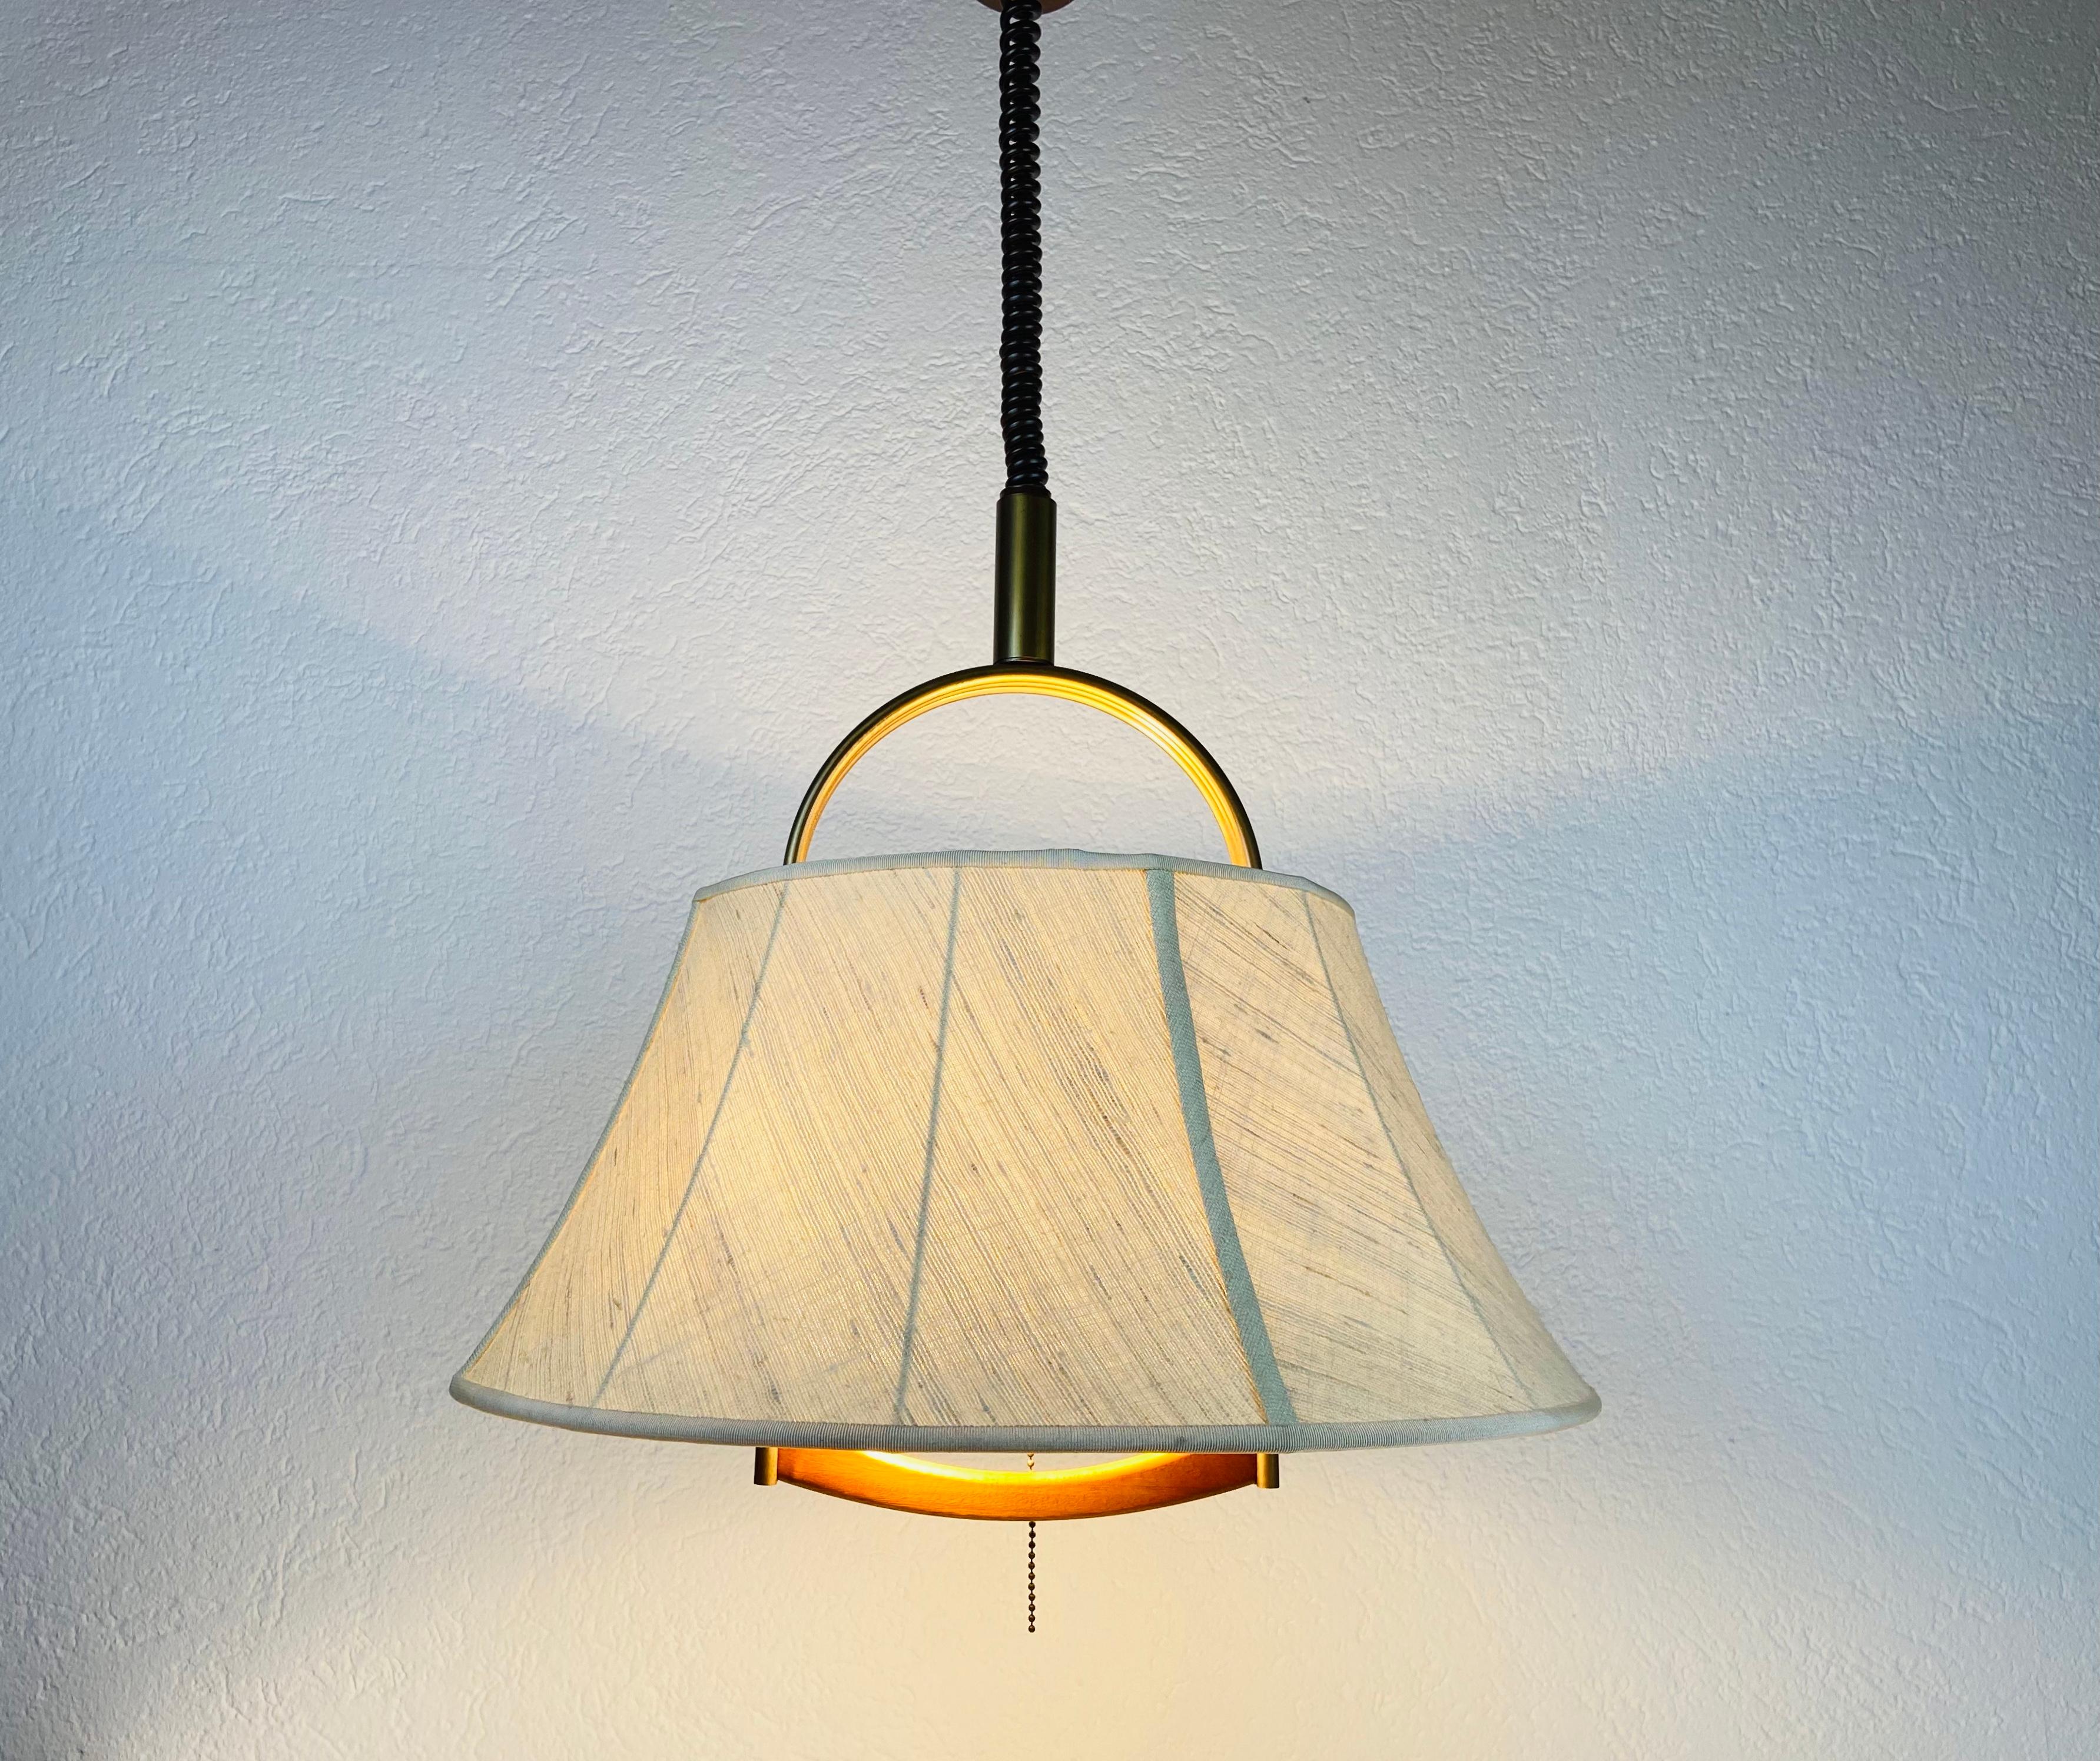 Vintage pendant lamp made by Temde in the 1970s. It is made from cloth and brass.

Measurements:

Height: 75-135 cm

Diameter: 52 cm 

The light require E27 (US E26) light bulbs. Works with both 120/220V. Very good vintage condition.

Free